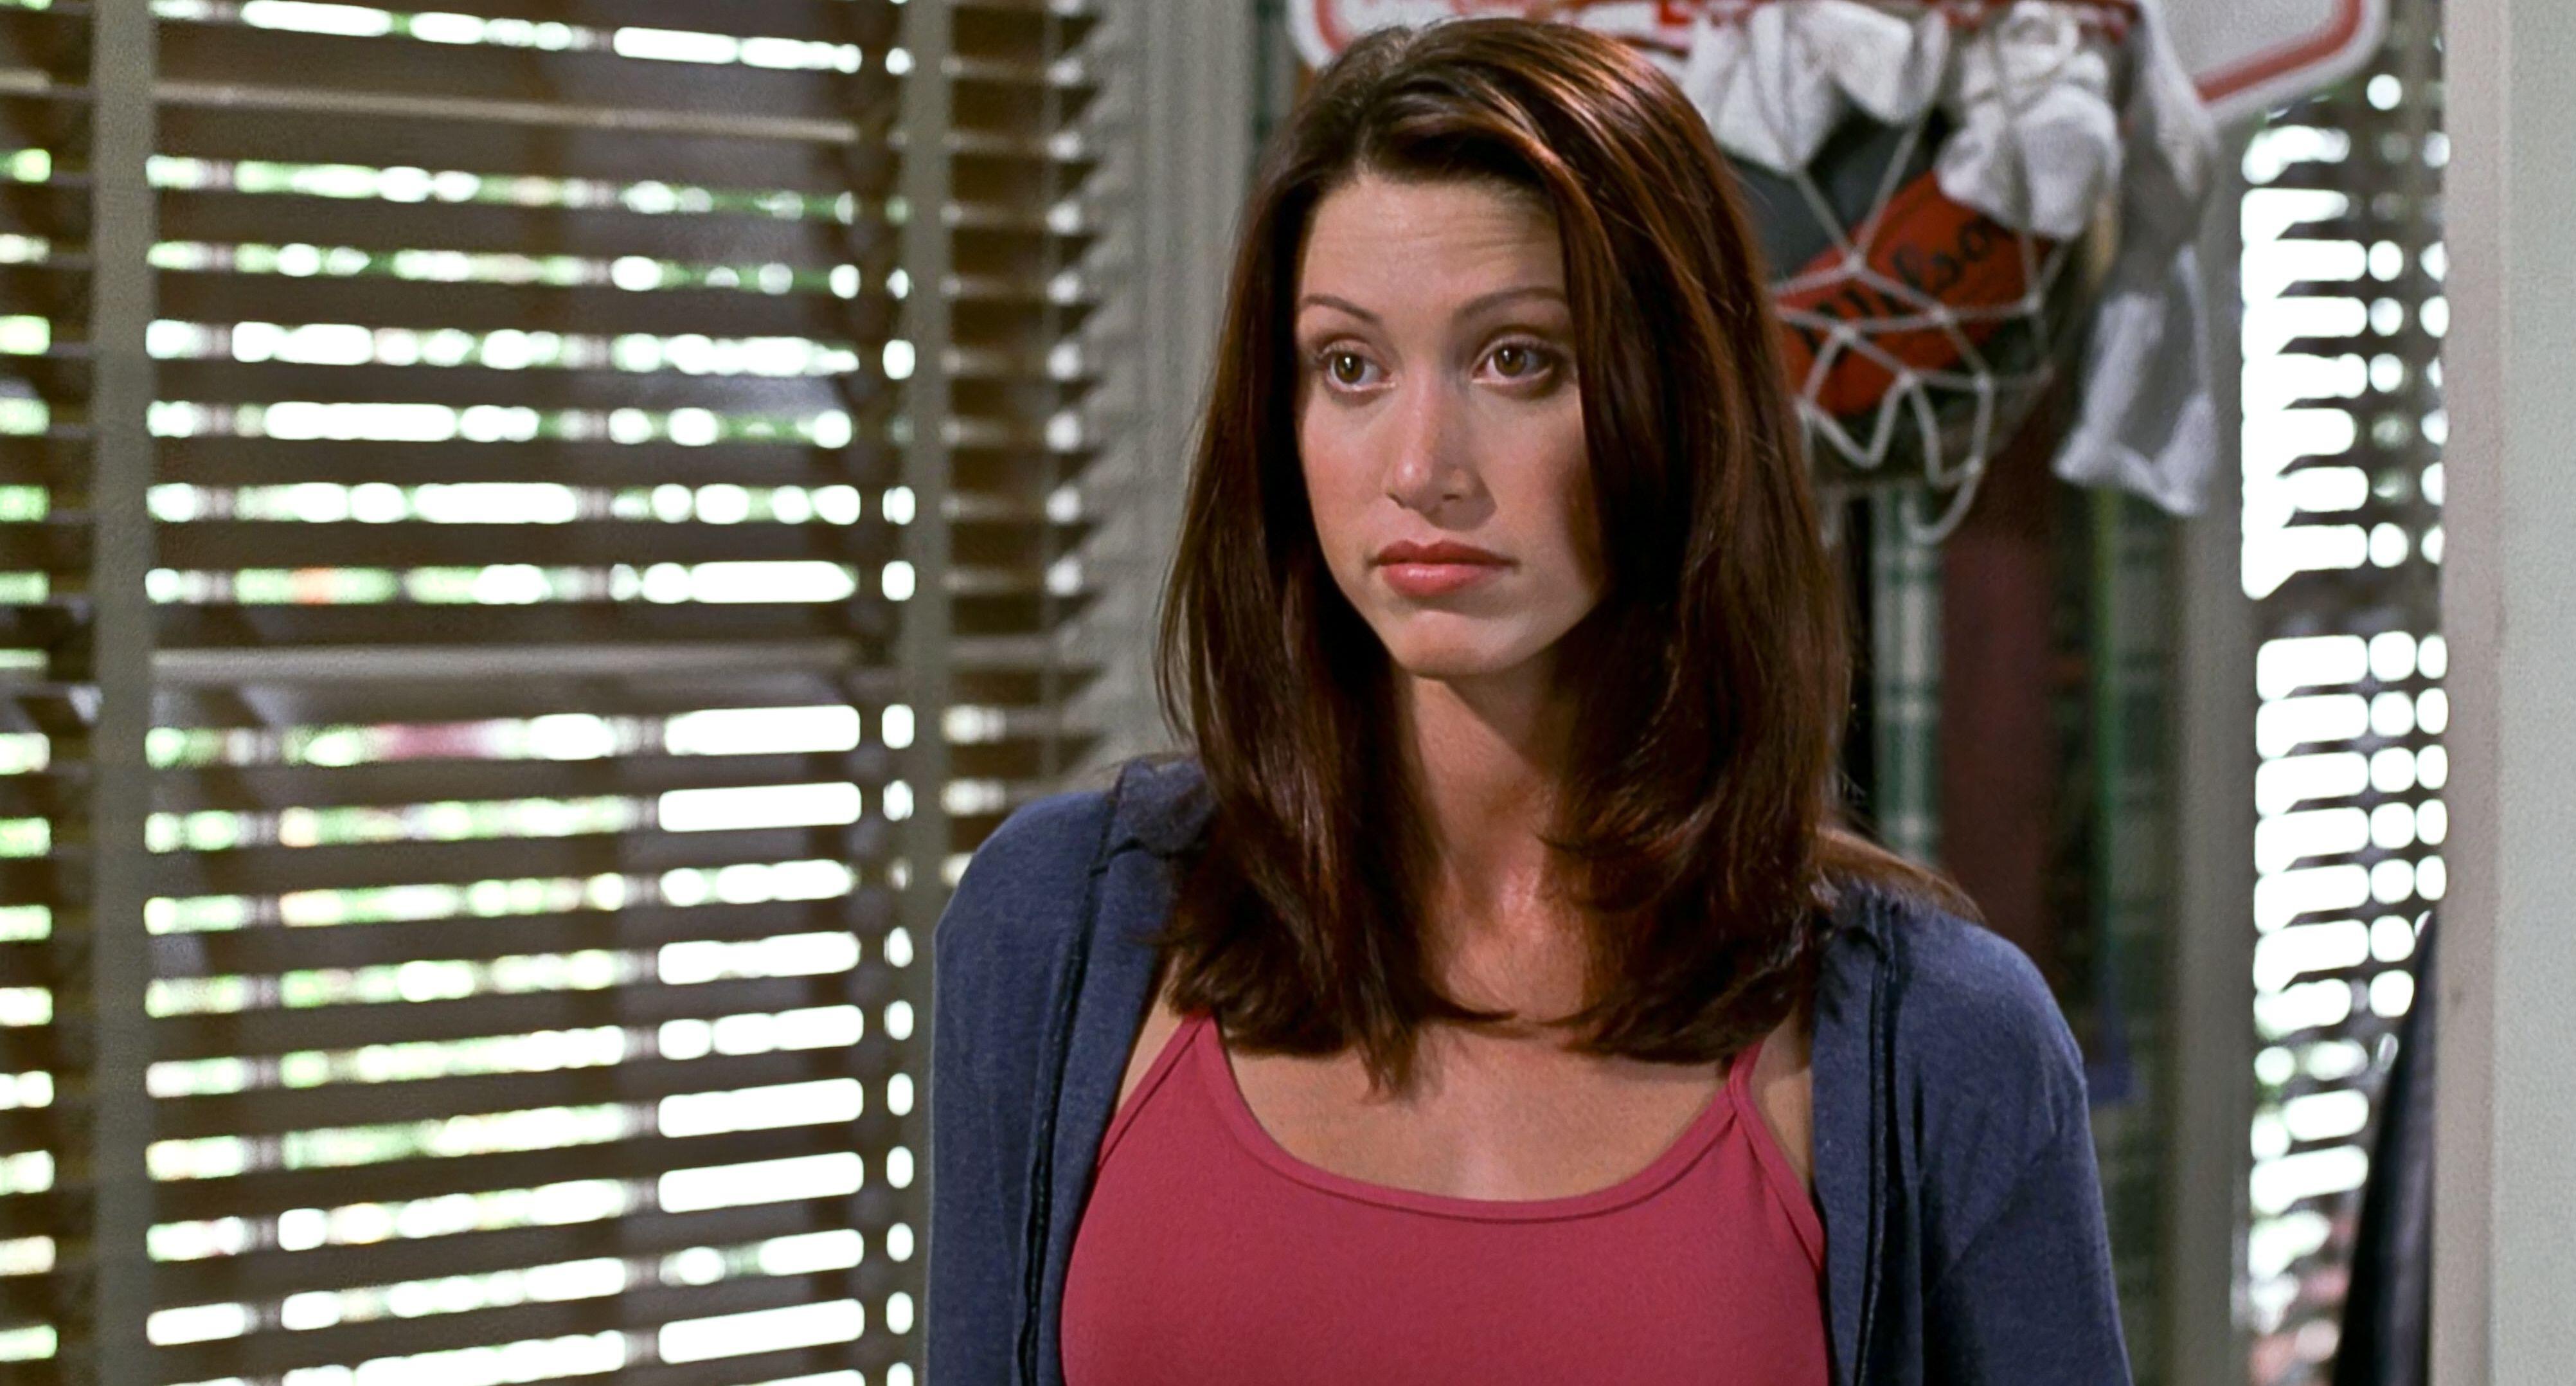 American Pie S Shannon Elizabeth Has Earned Hundreds Of Thousands From Unexpected Side Hustle